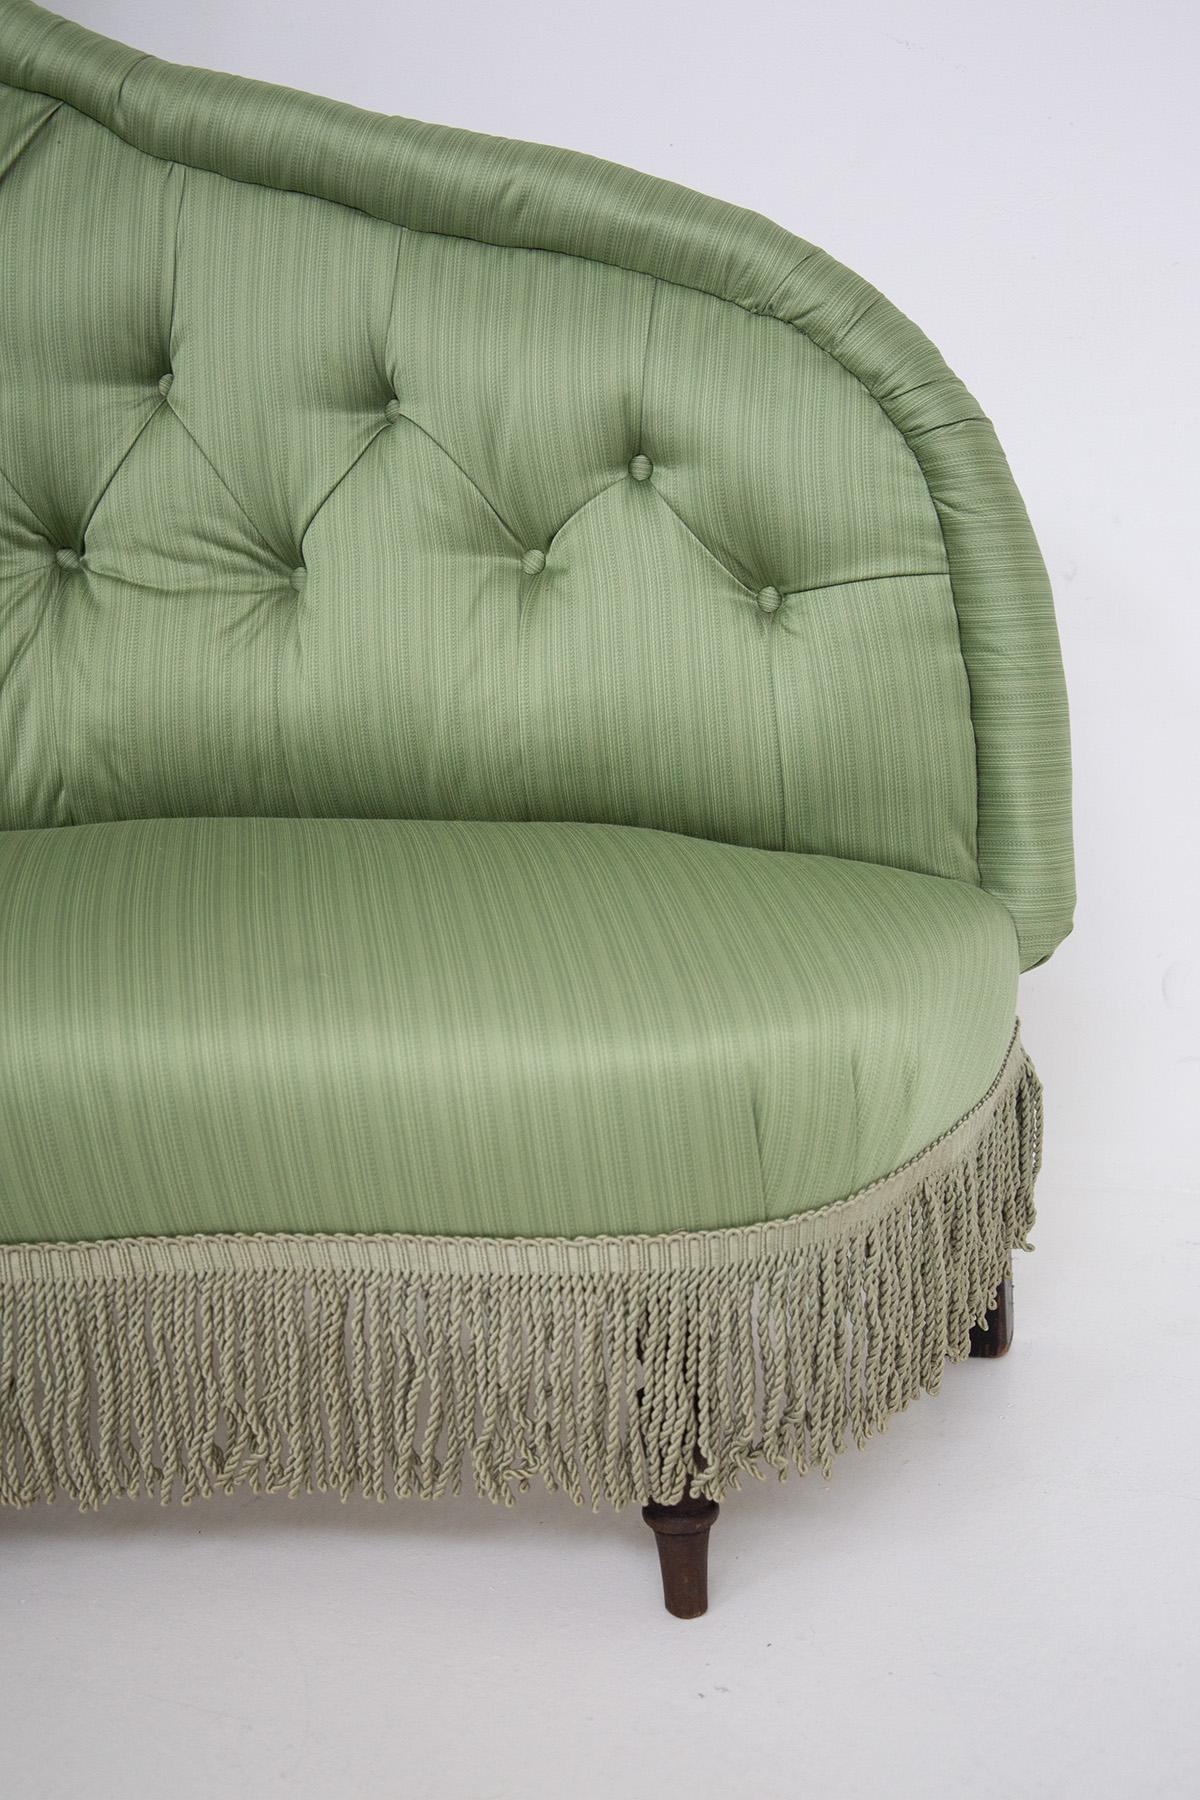 Italian Vintage Luxury Sofa in Wood and Green Silk Satin In Good Condition For Sale In Milano, IT